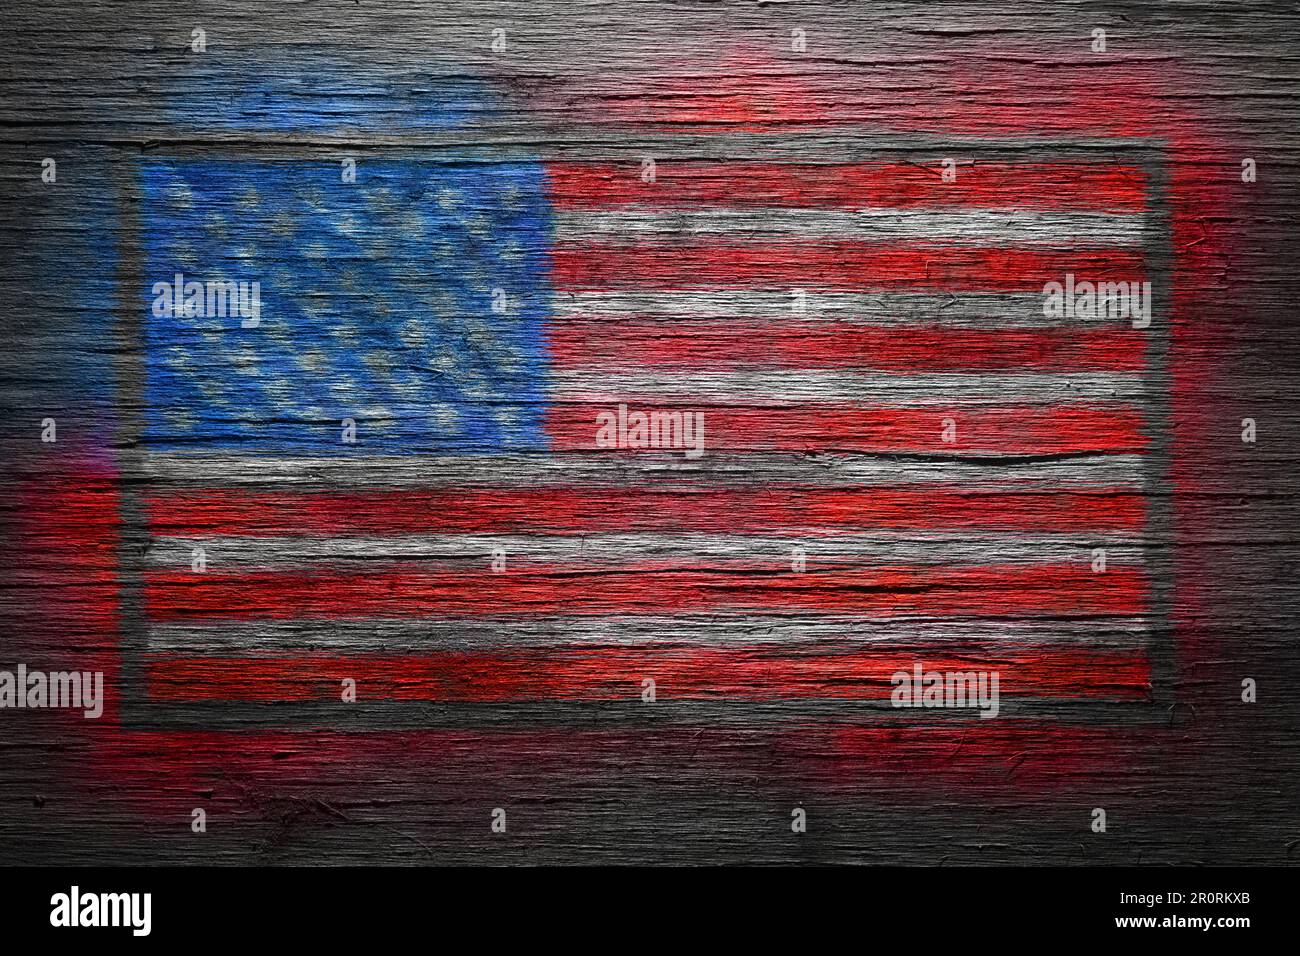 American flag spray painted on old distressed wood Stock Photo